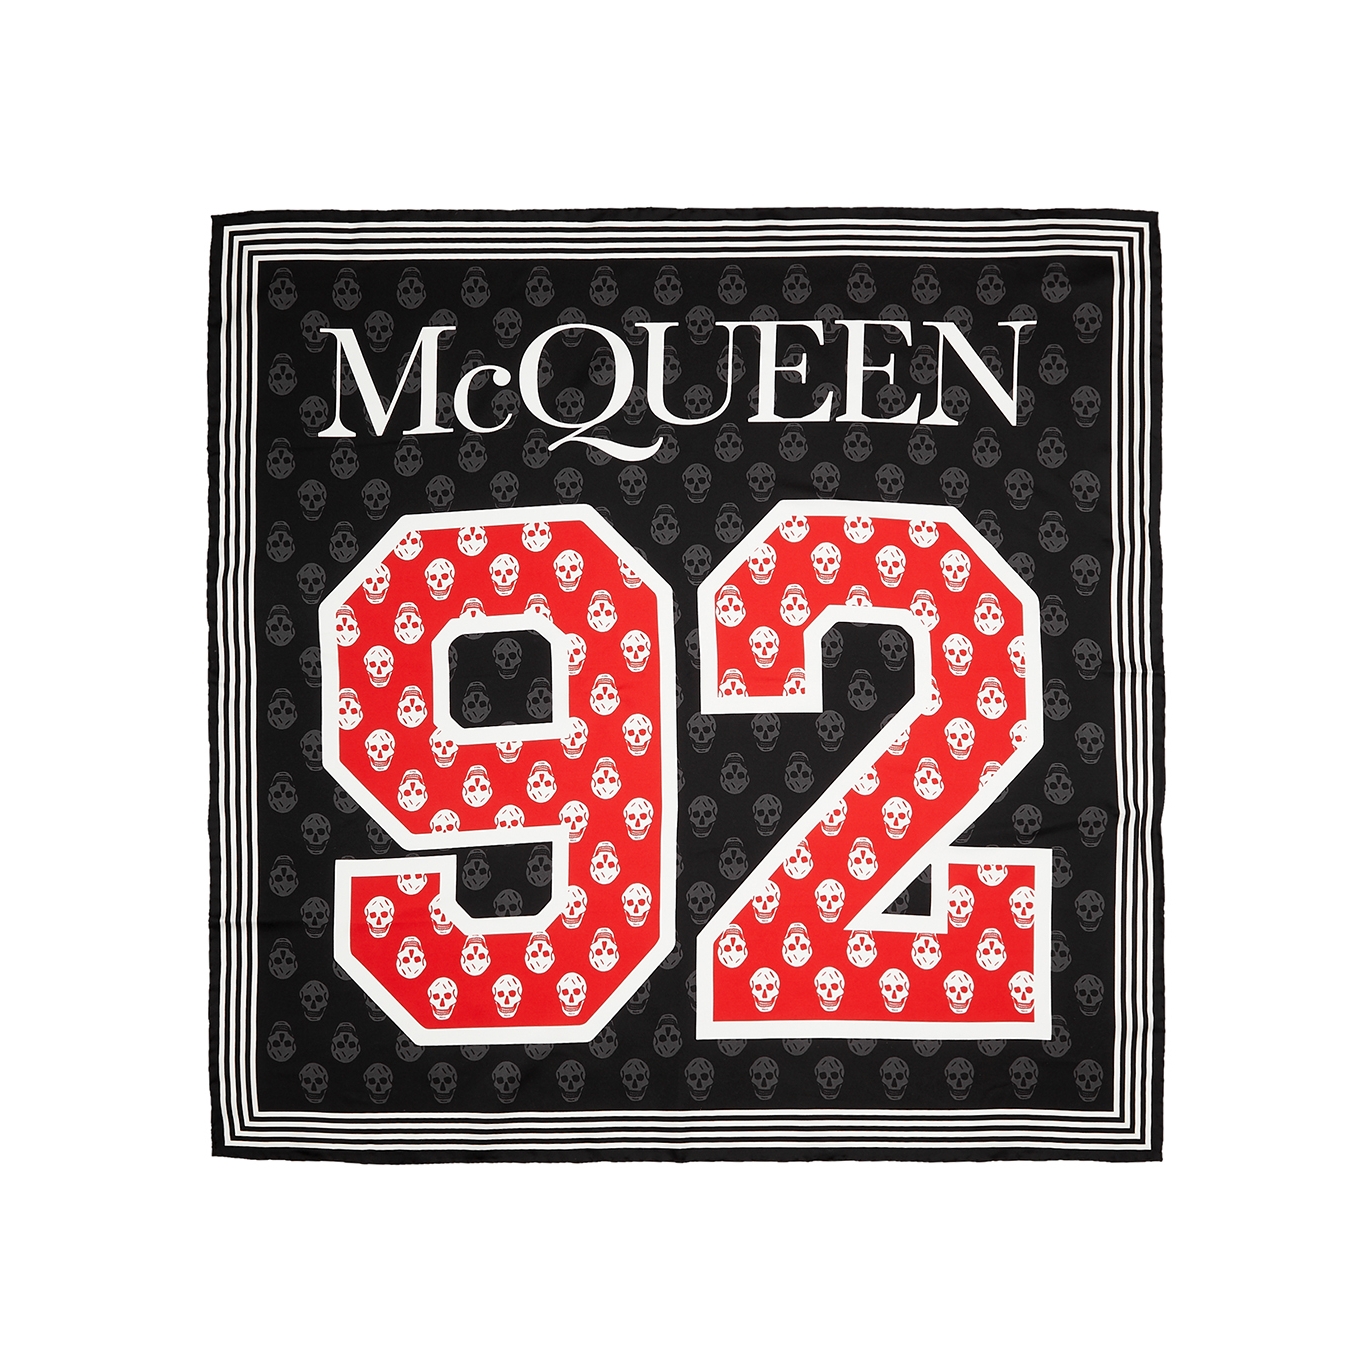 Alexander McQueen Sport 92 Printed Silk Scarf - Black And Red